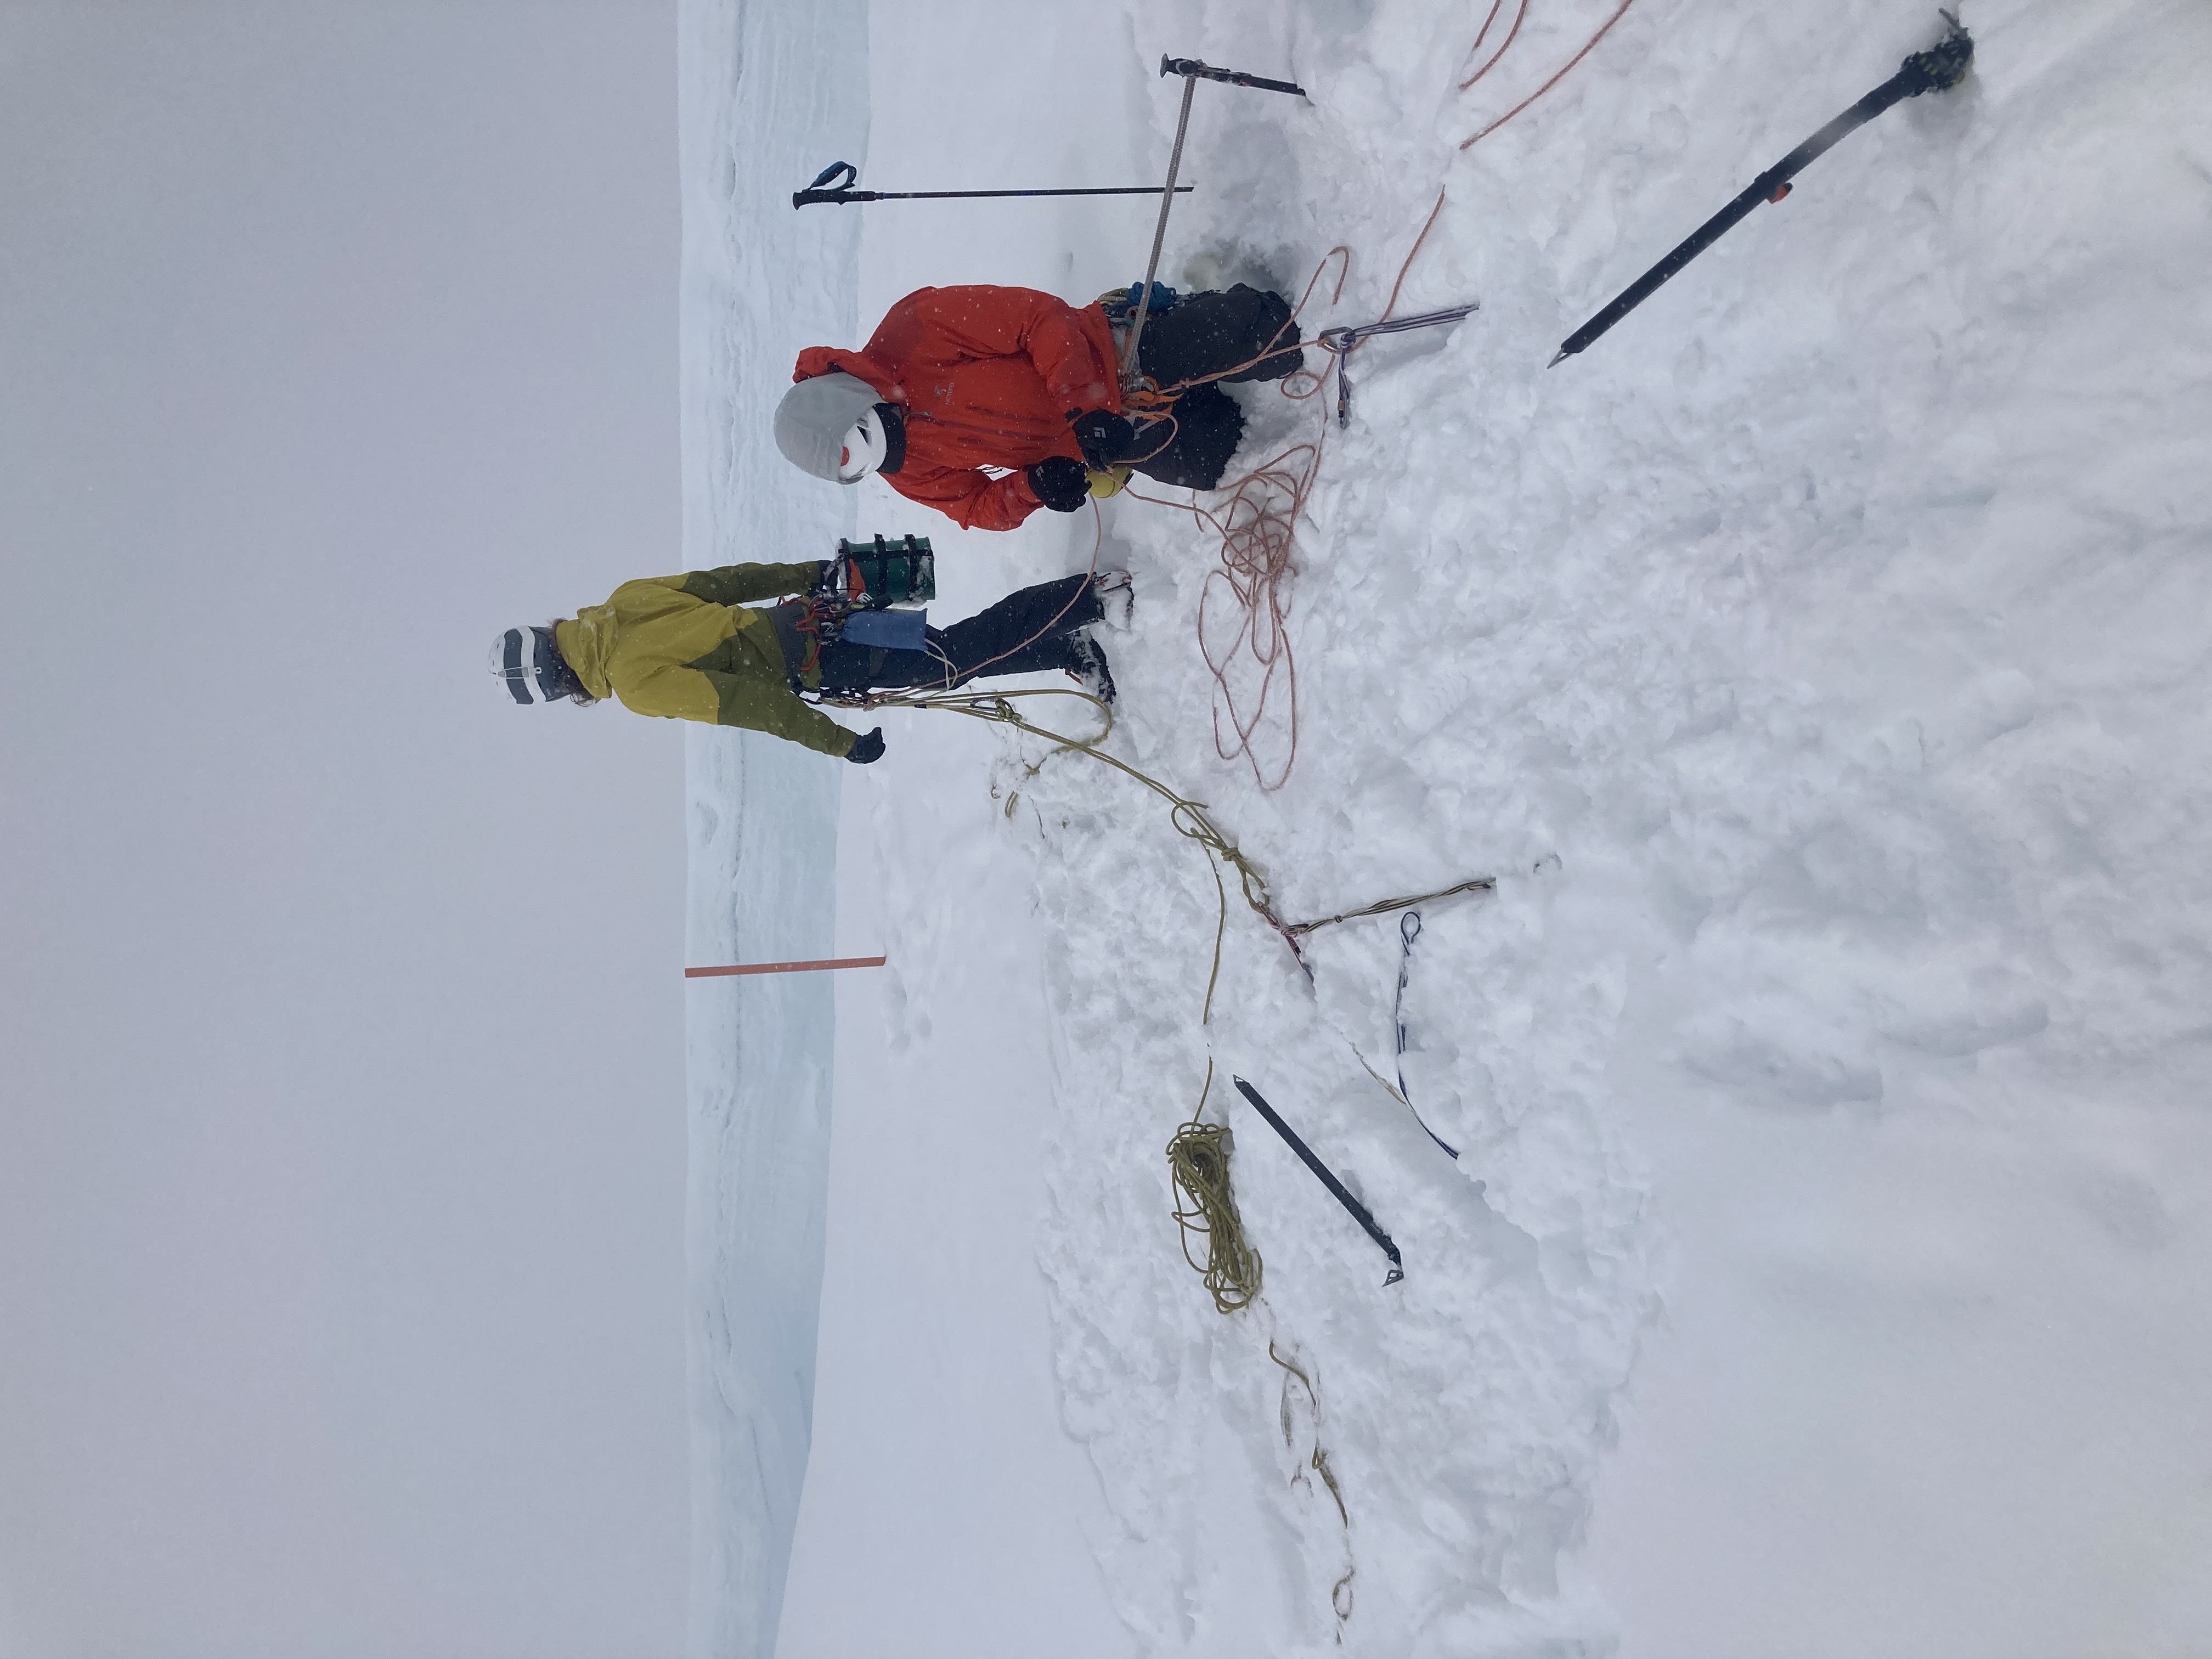 Two climbers rig up a rope system near the edge of a crevasse 